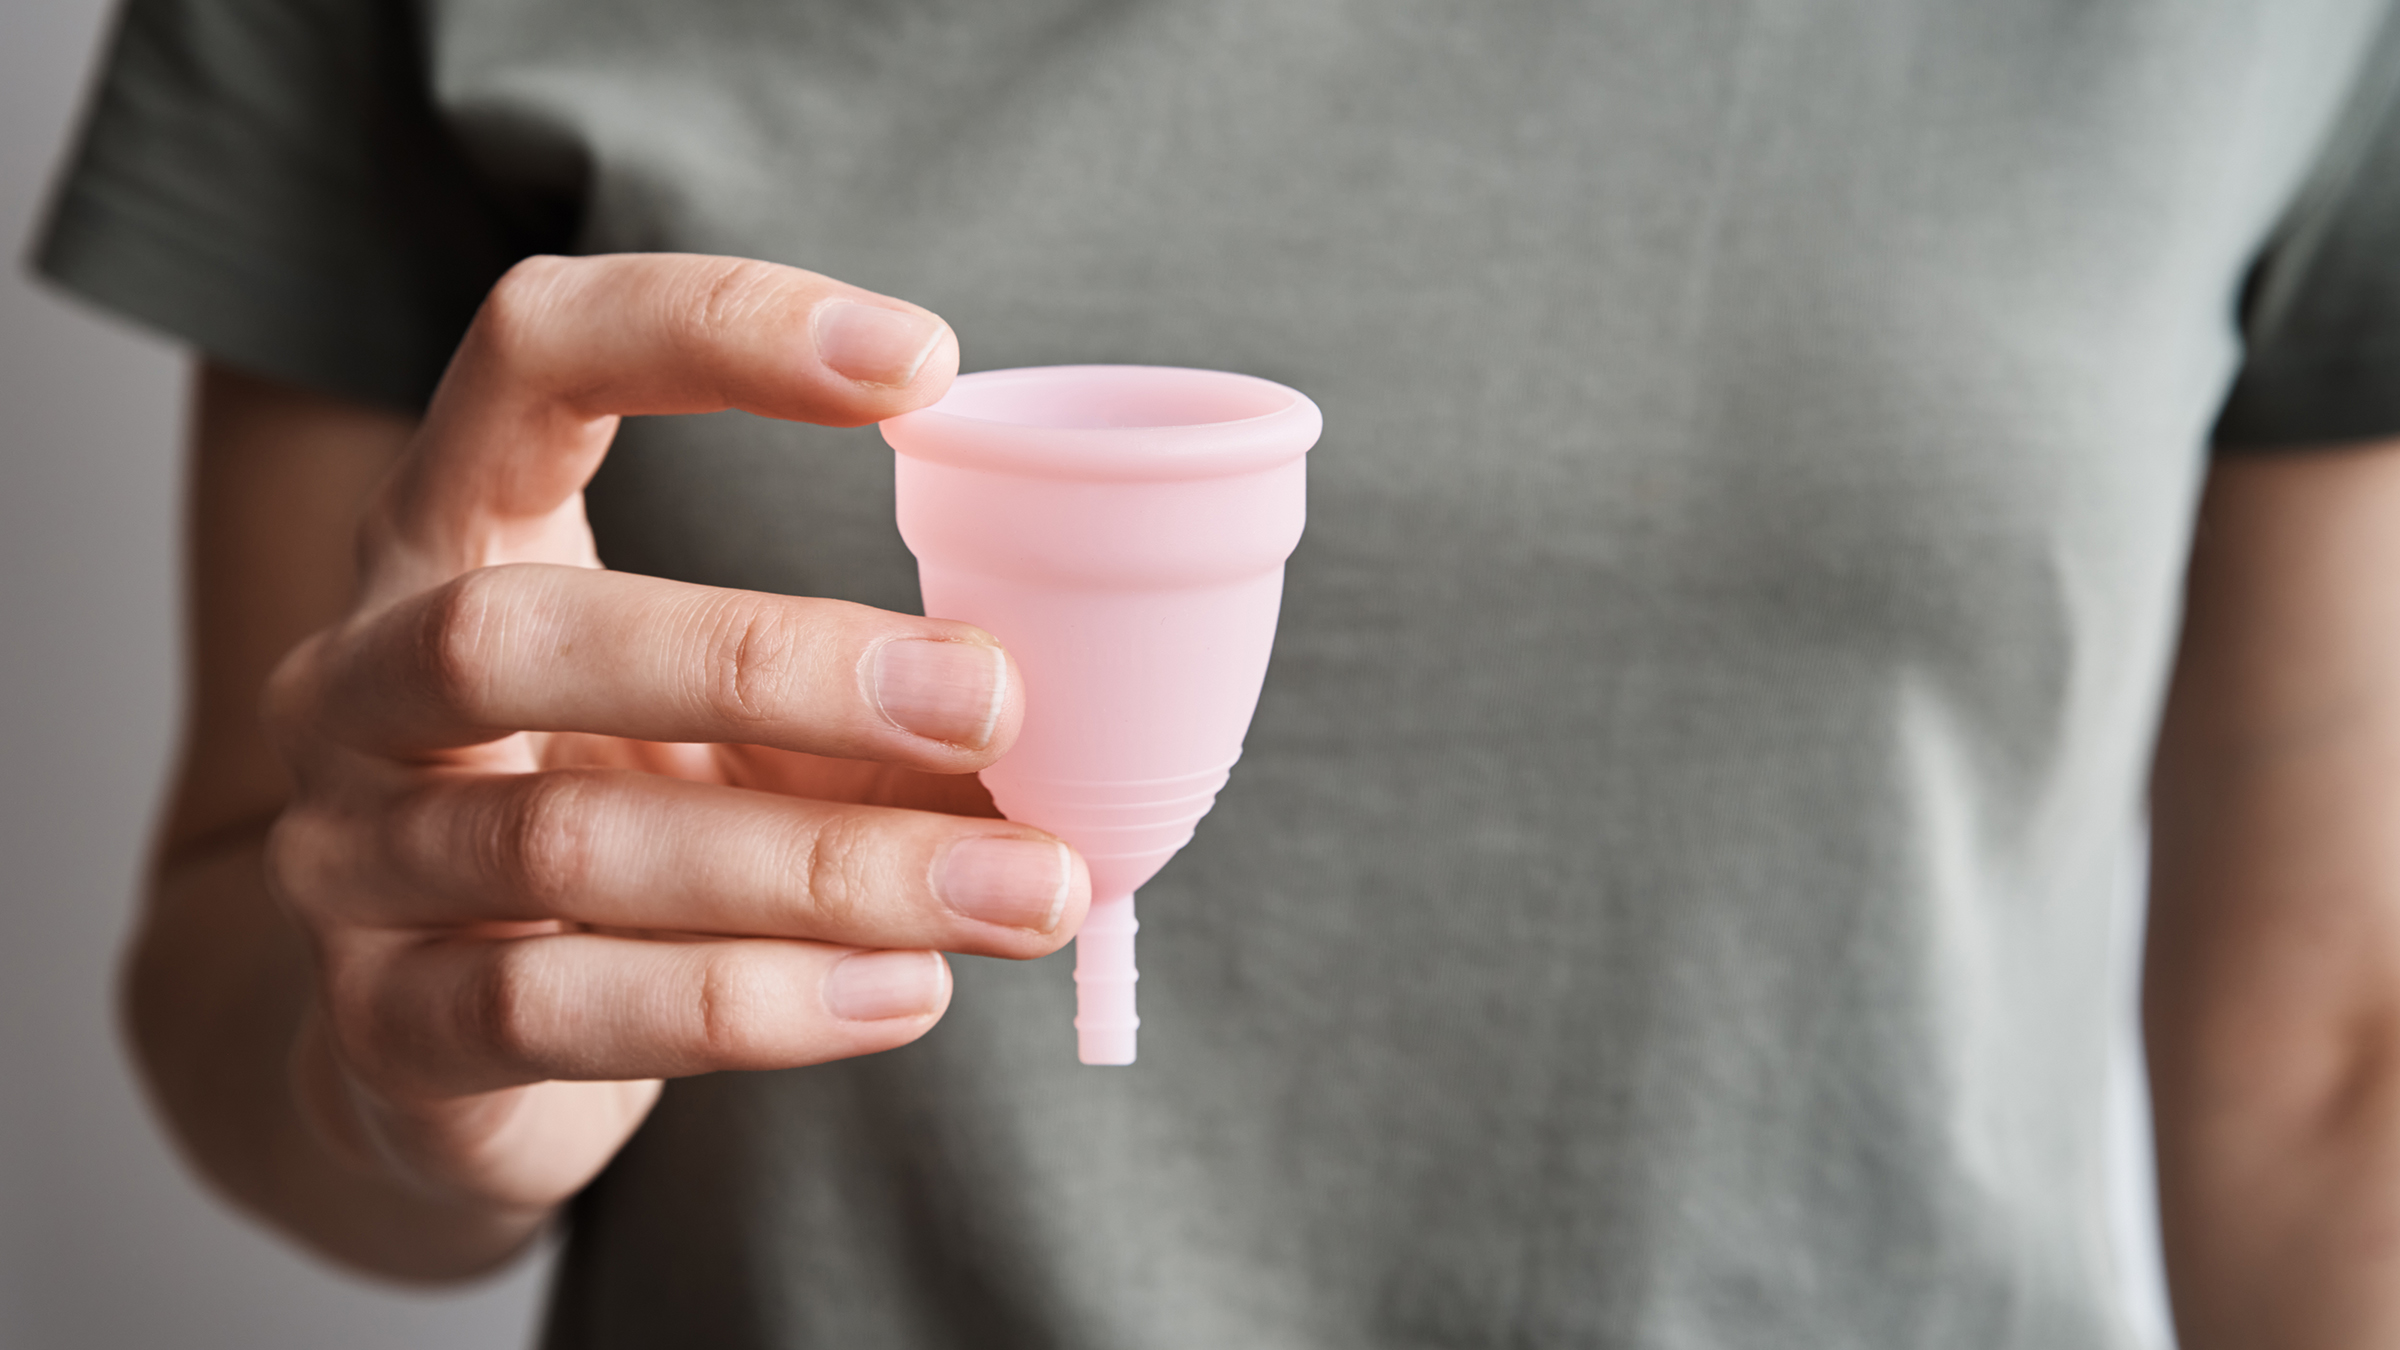 Menstrual Cups: How to Use, Benefits, Risks, and More - GoodRx